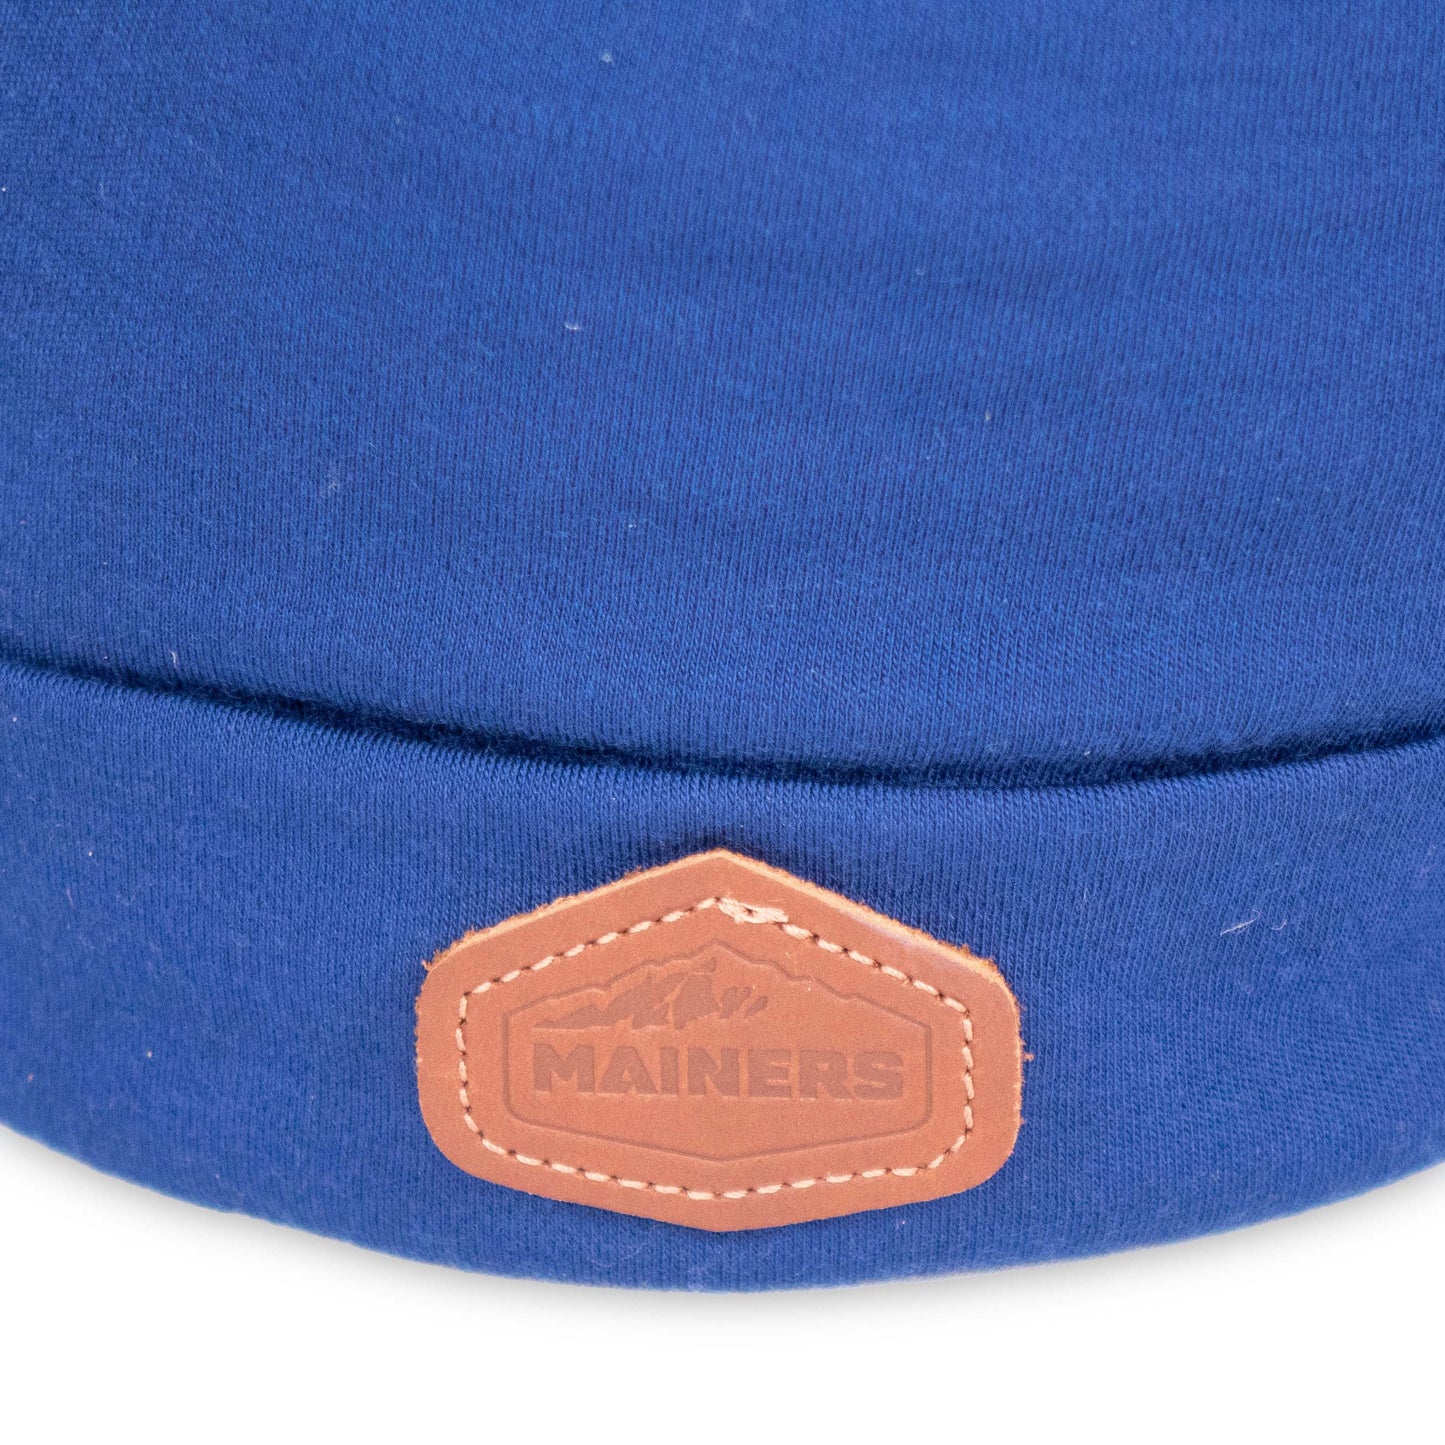 A Mainers Lightweight Wool Beanie with a leather label on it.